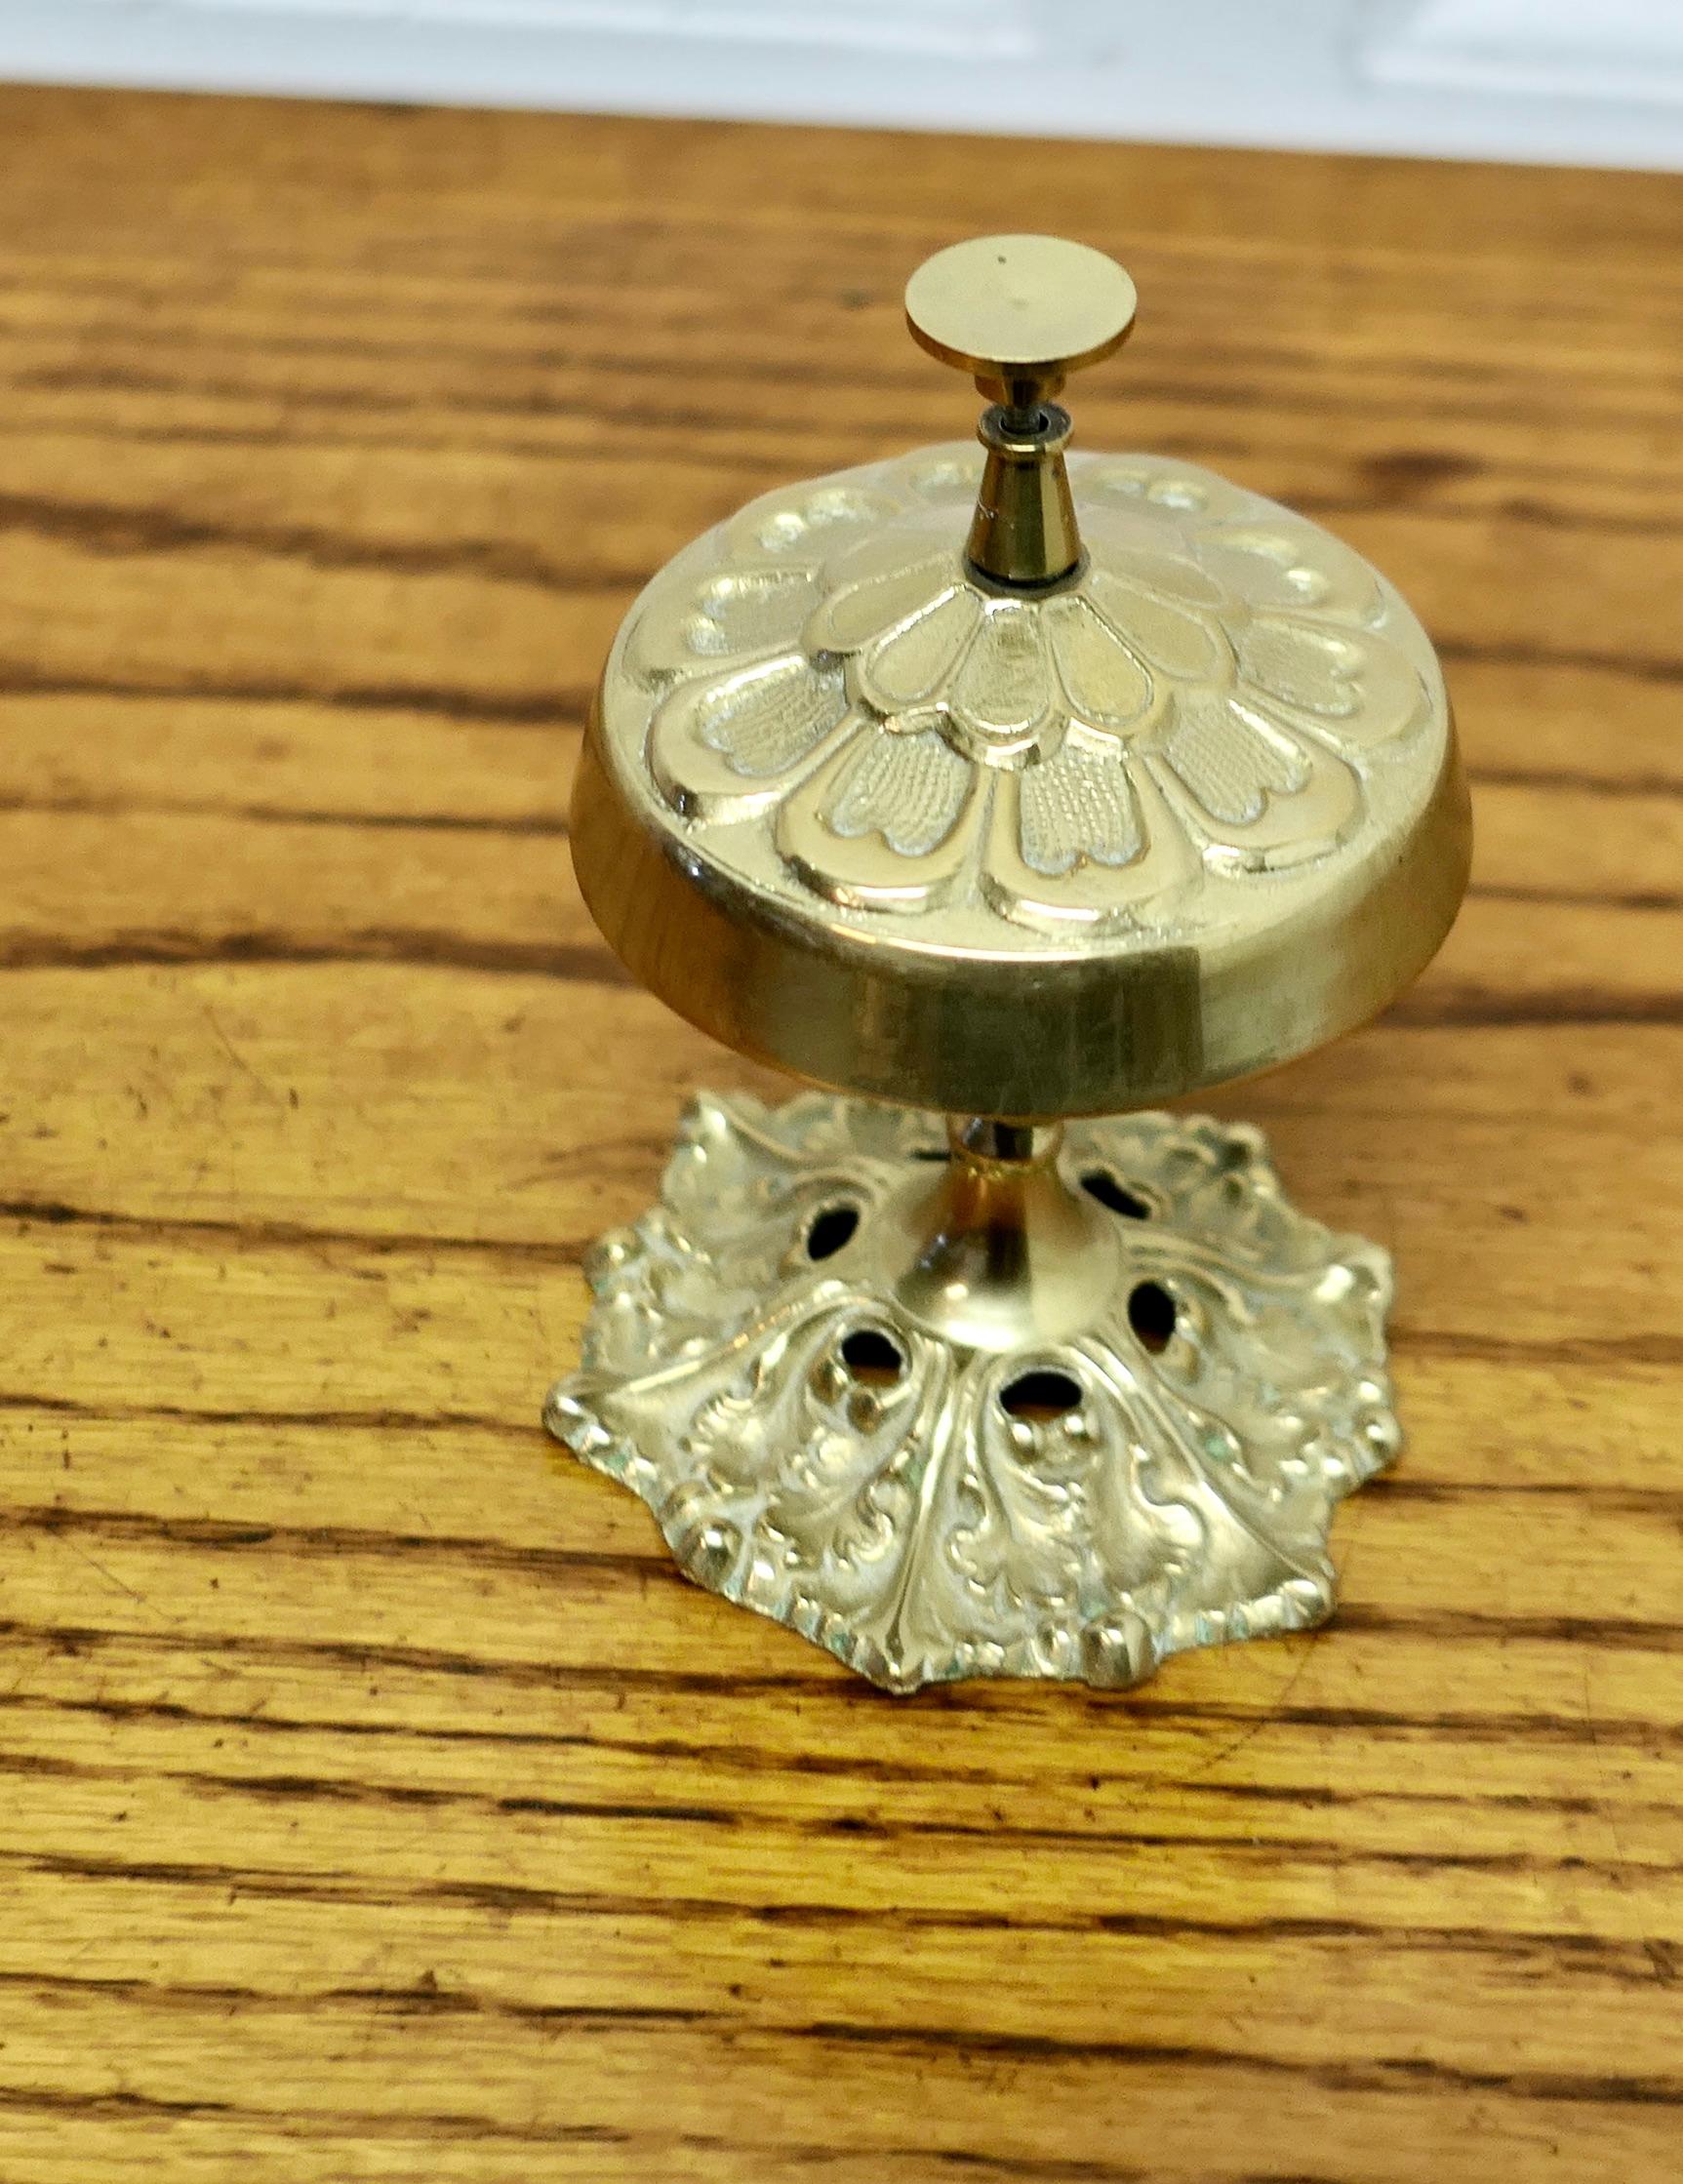 Decorative Brass Courtesy Counter Top Bell

Made in a floral style in solid brass, good and ready to use with a high pitched ding, the bell is 3” in diameter and 5” high 
TVY146